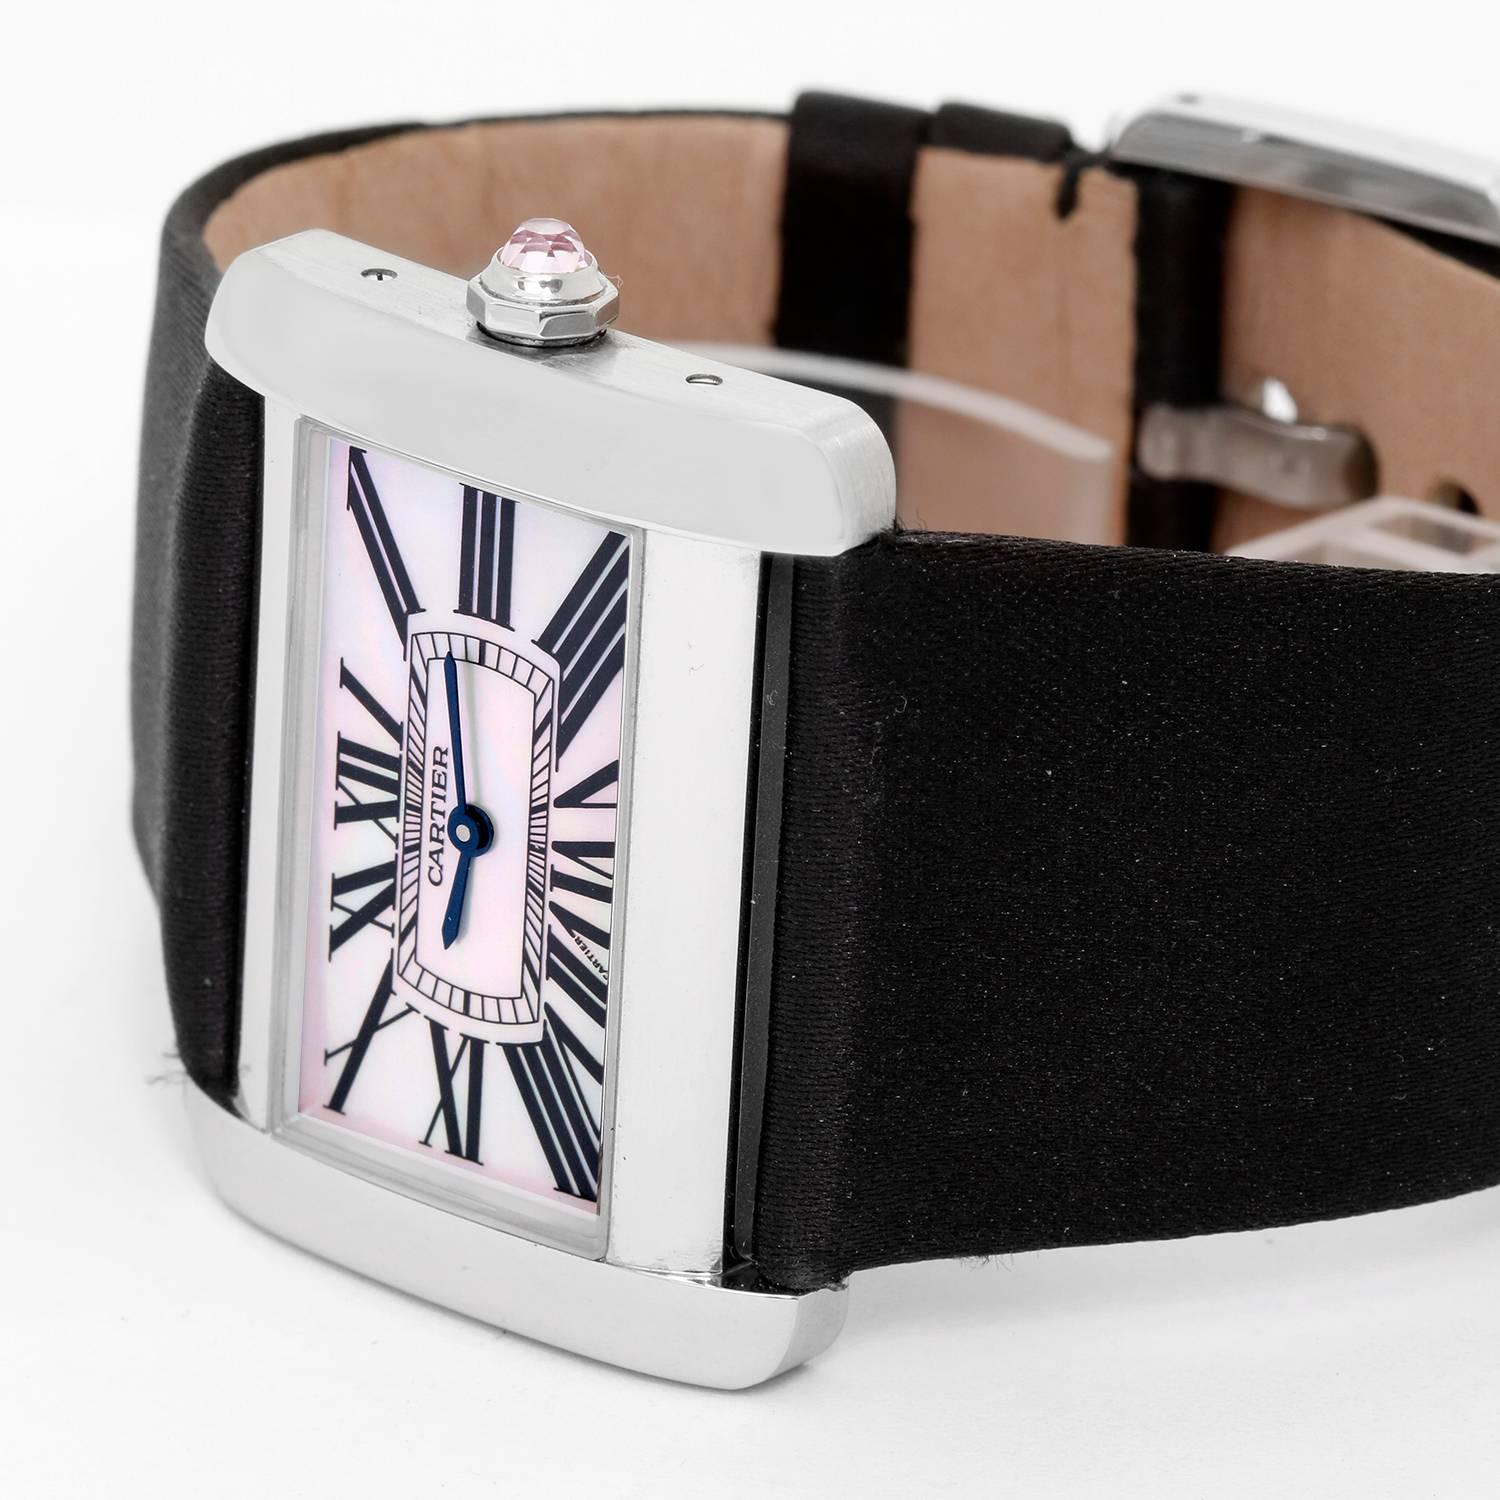 Cartier Tank Divan Stainless Steel Watch W6302003 -  Quartz. Rectangle Stainless Steel ( 38 mm x 31 mm) with pink Mother of Pearl dial with Roman Numerals. Black Cartier Satin Strap. Pre-owned with custom box. Number 184 out of 500 in the series.